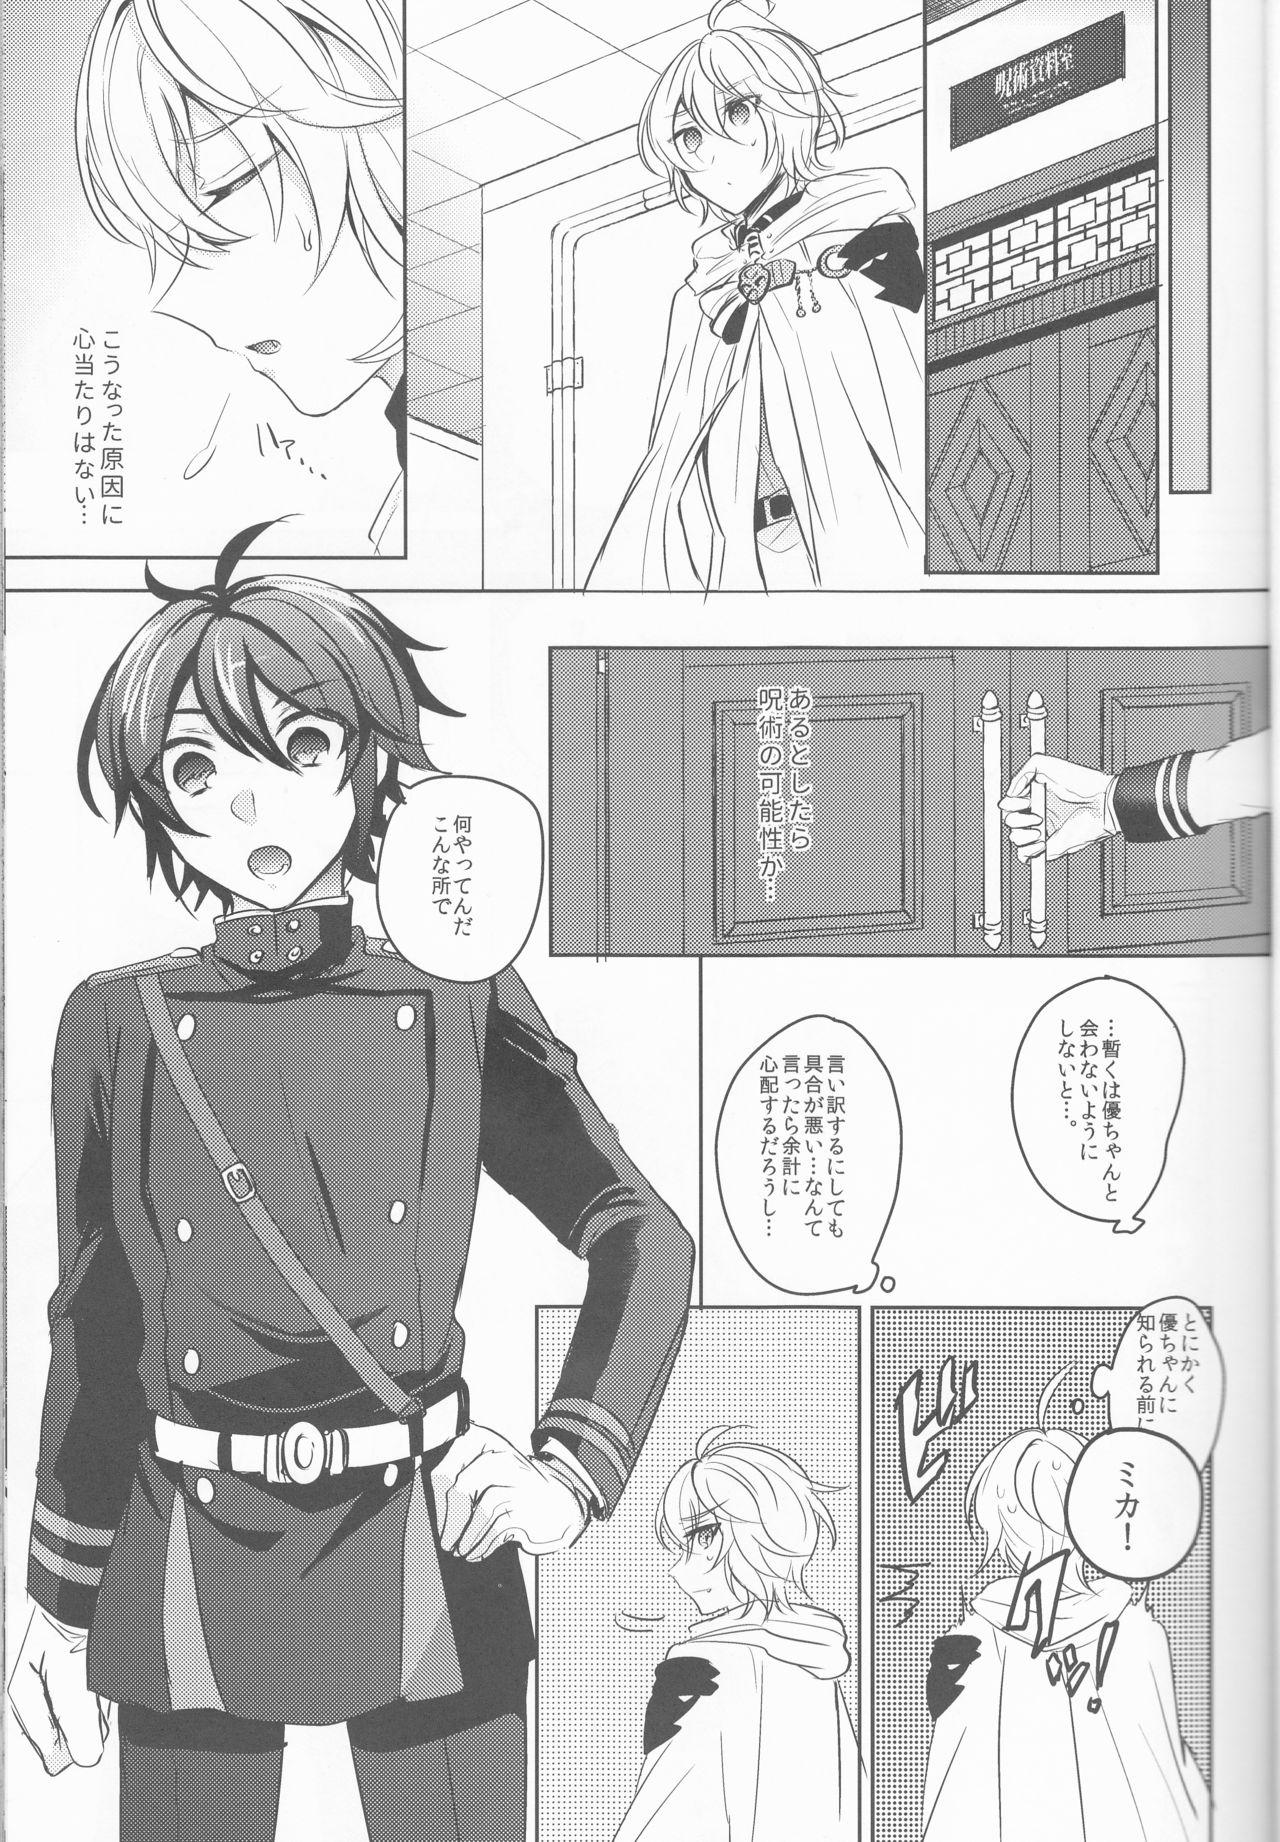 Free 18 Year Old Porn Lovers Dreamer - Seraph of the end Toilet - Page 4